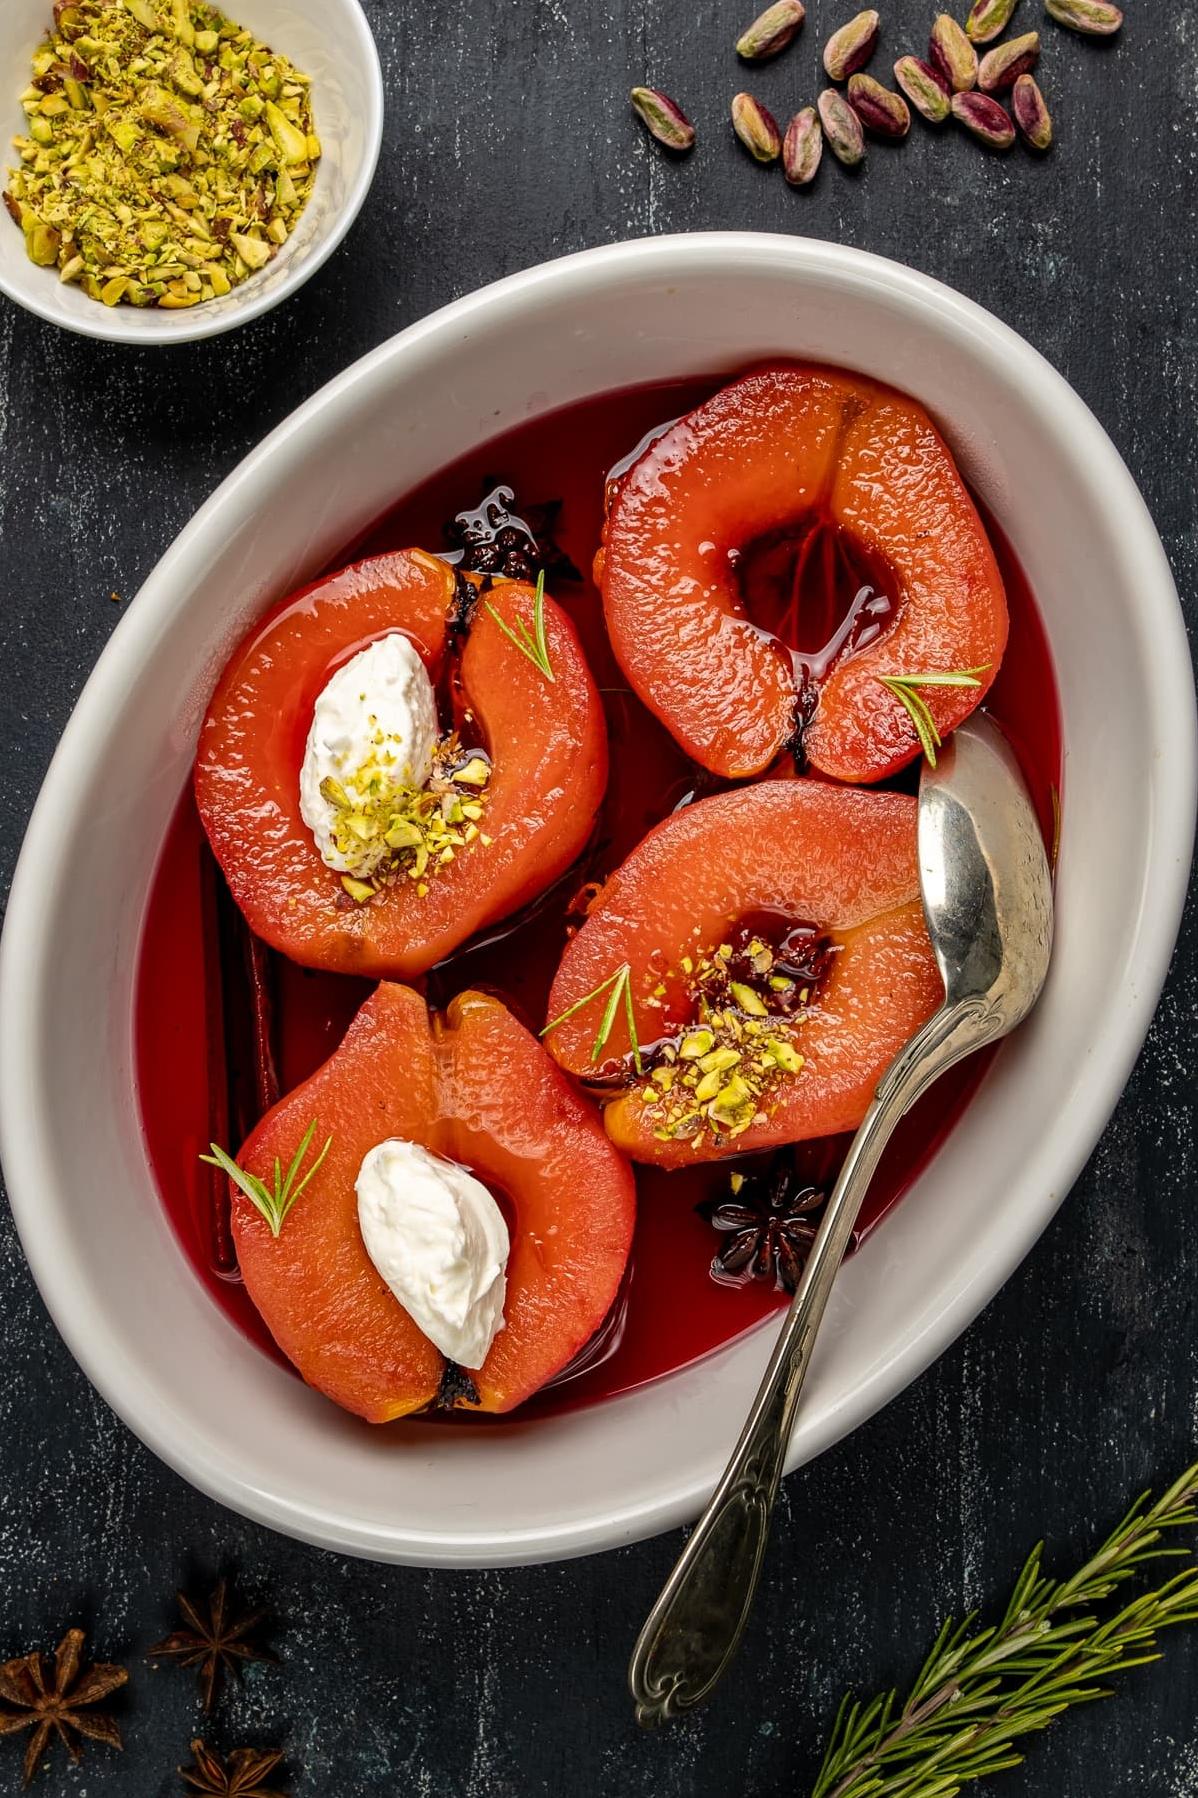  A golden-hued quince dessert with creamy decadence.